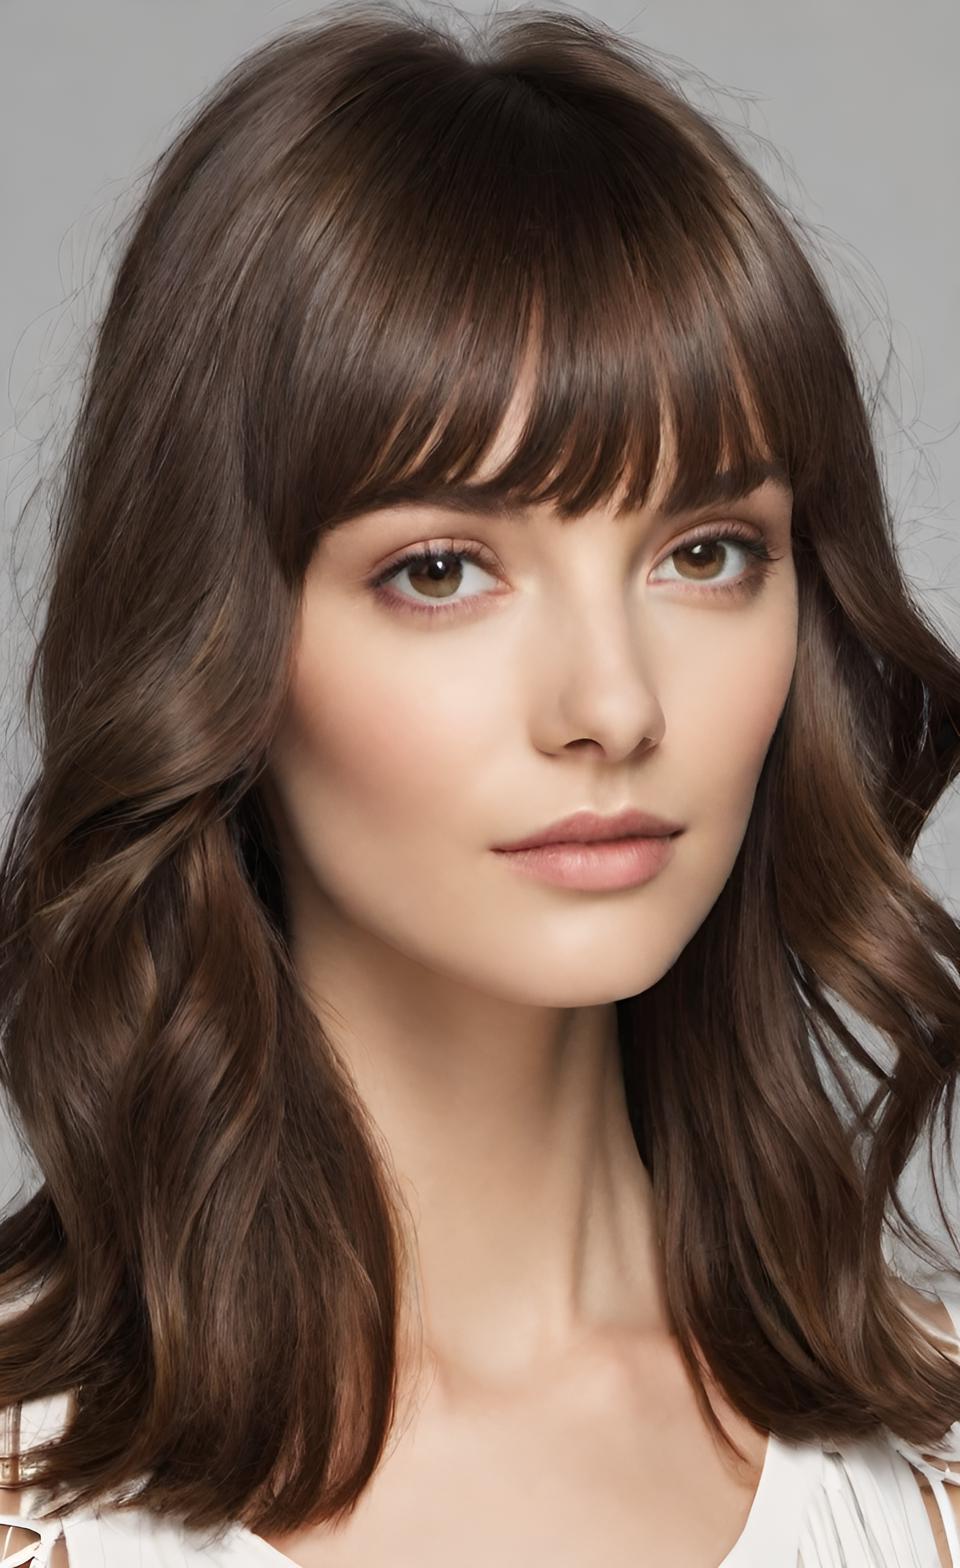 Wispy Bangs For Long Hair: Styling Tips for Gorgeous Braids